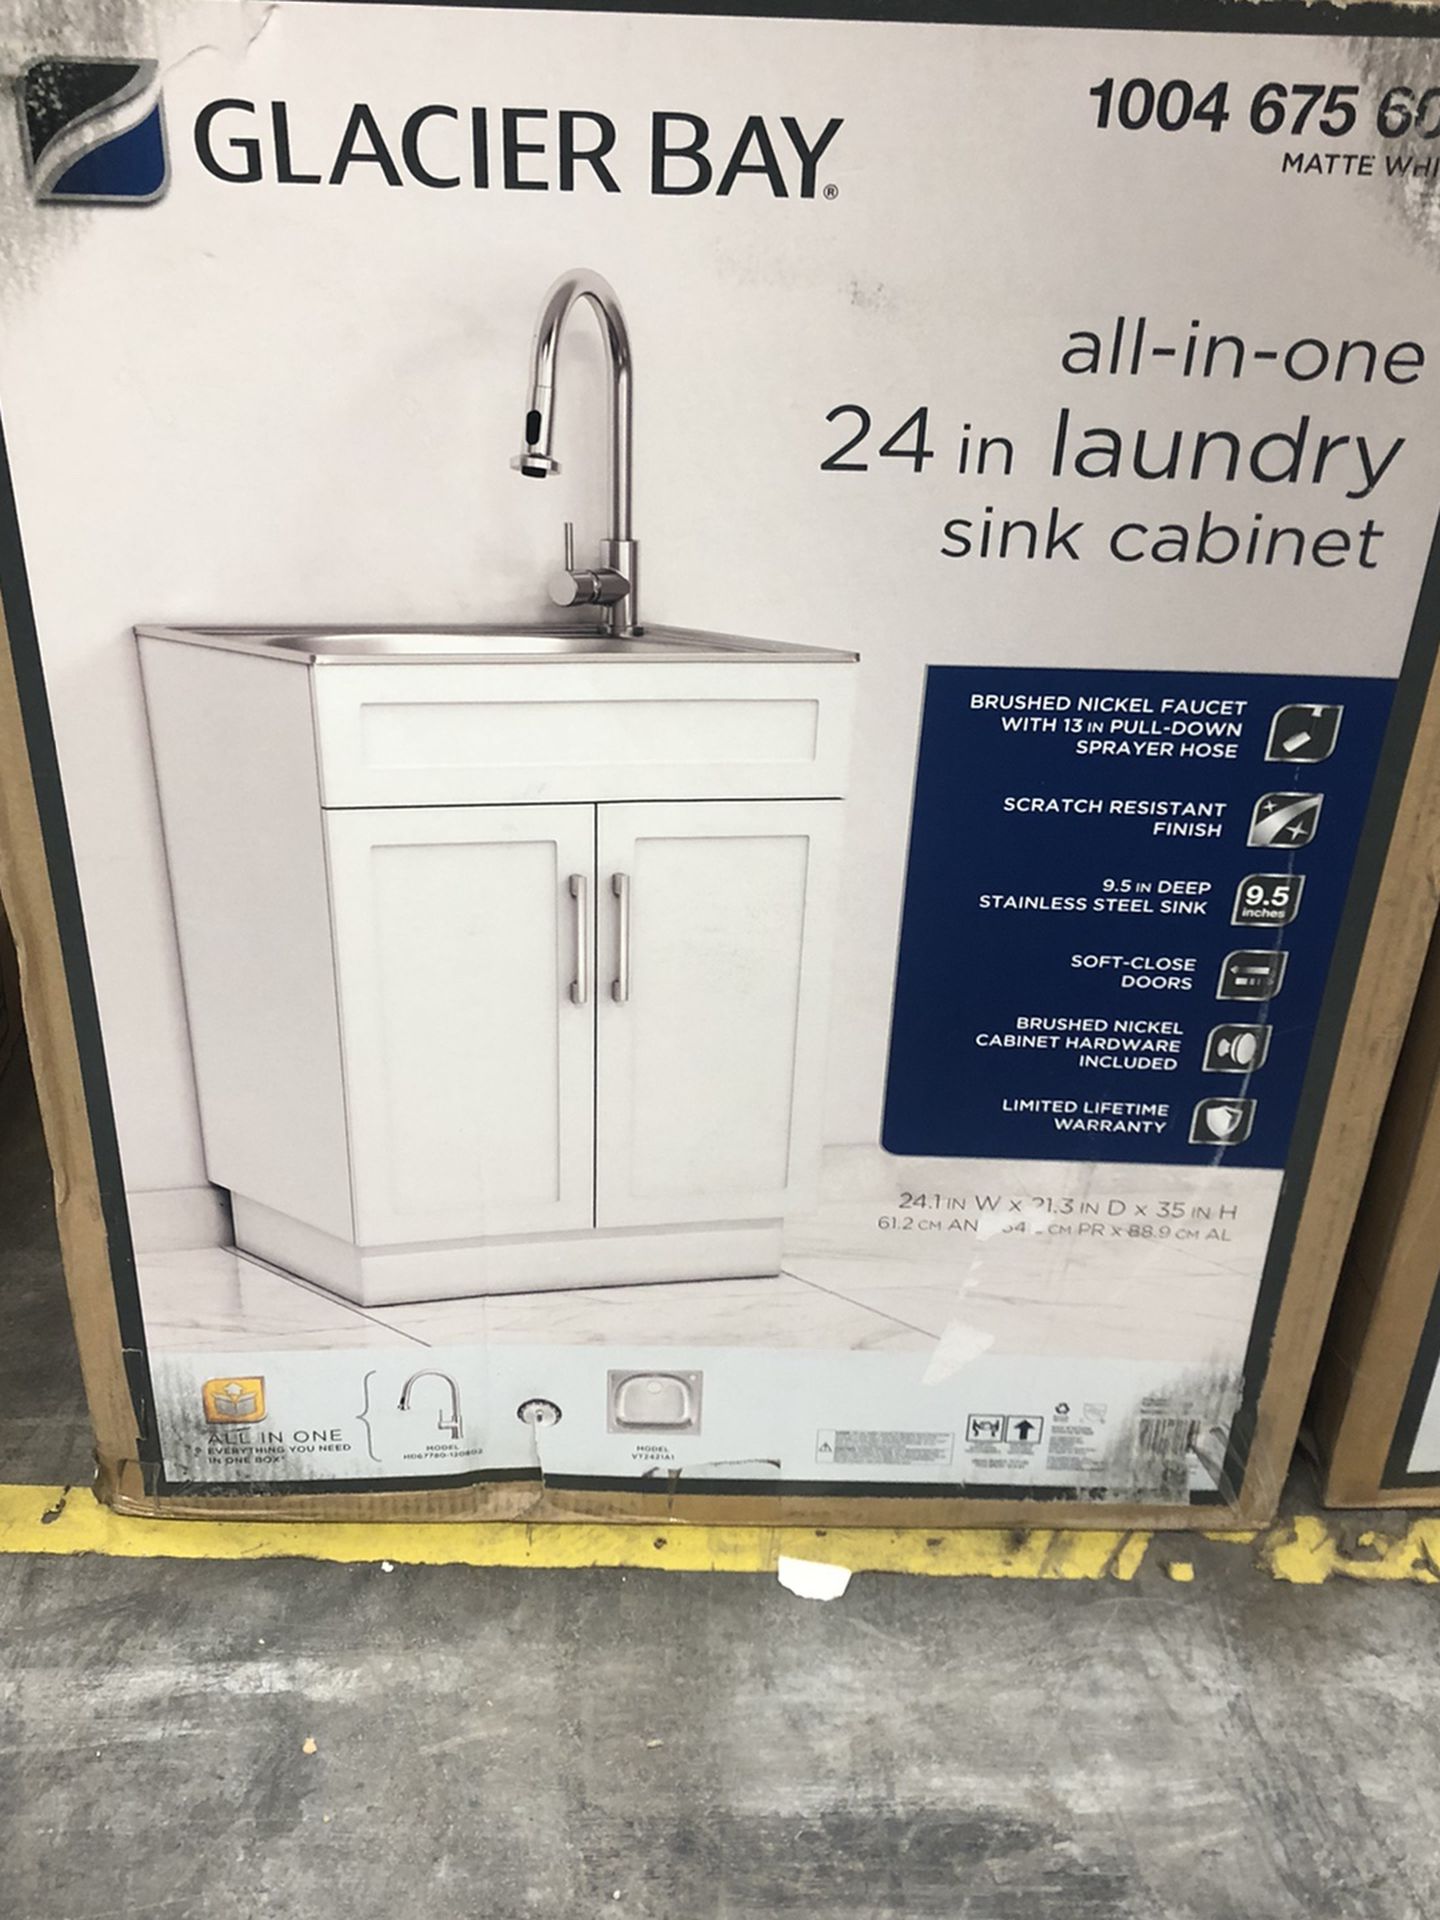 All In One 24 Inch Laundry Sink Cabinets